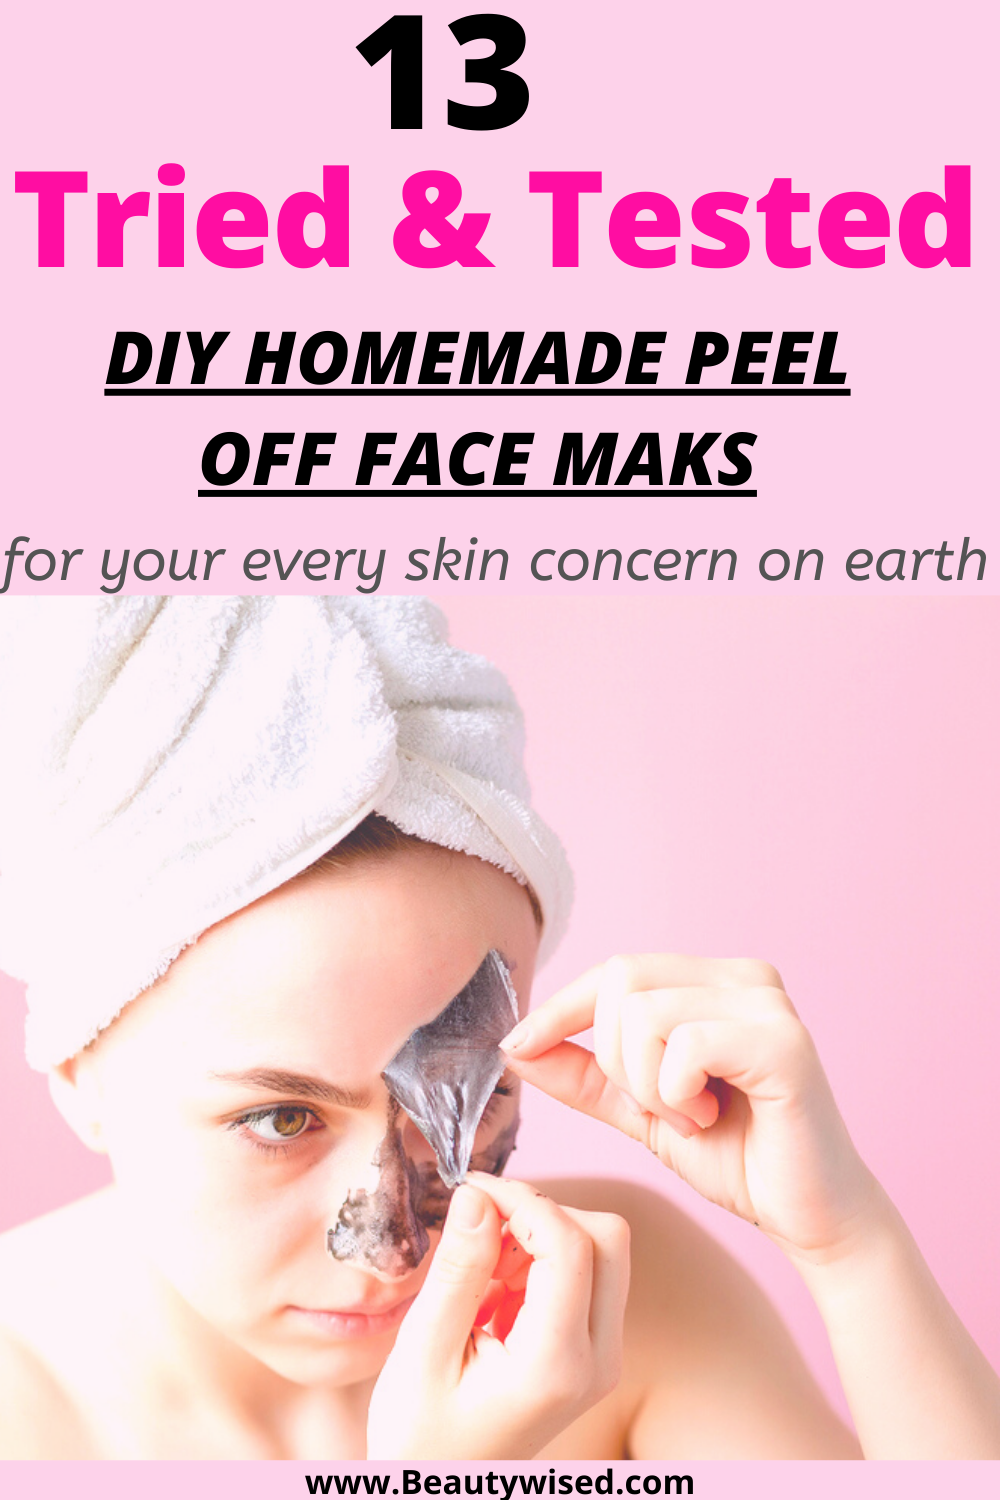 DIY Peel off face masks for blackheads, whiteheads, acne, pimples, wrinkles; for every skin problem. - DIY Peel off face masks for blackheads, whiteheads, acne, pimples, wrinkles; for every skin problem. -   19 diy Face Mask for wrinkles ideas